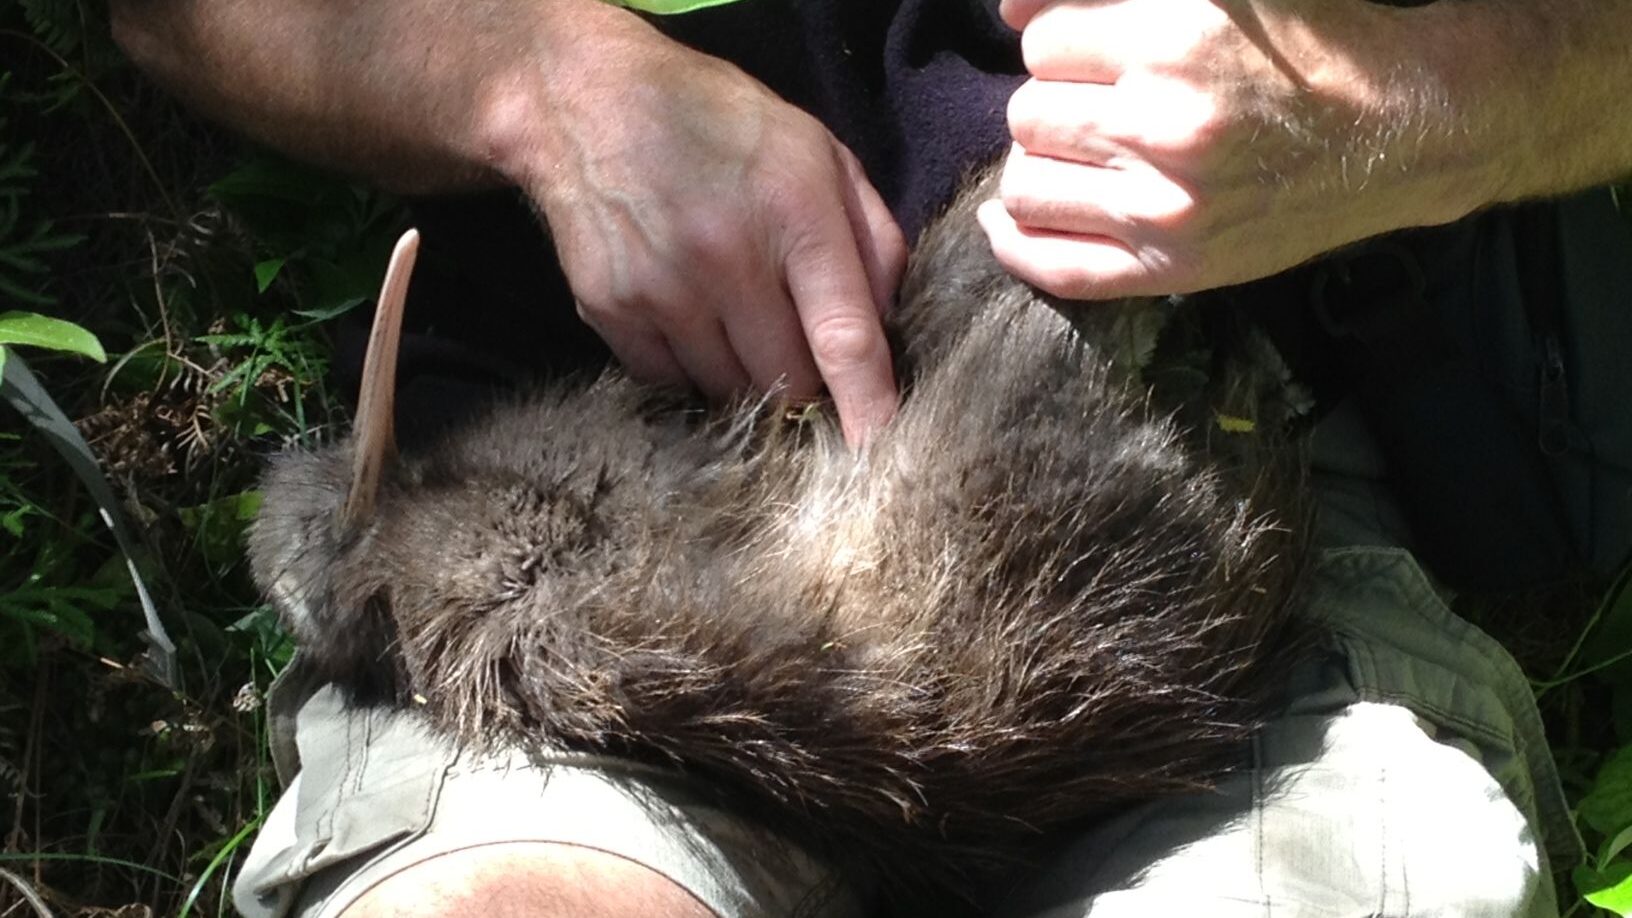 A kiwi being held by a ranger